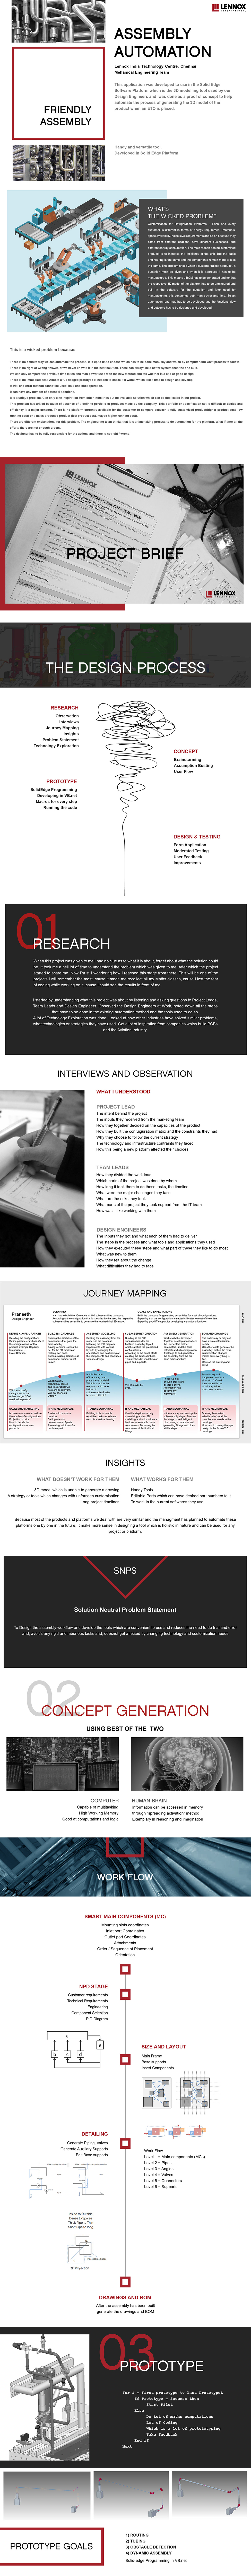 customisation automation refregeration mass customisation assembly UX mapping journey mapping SNPs user flow prototype